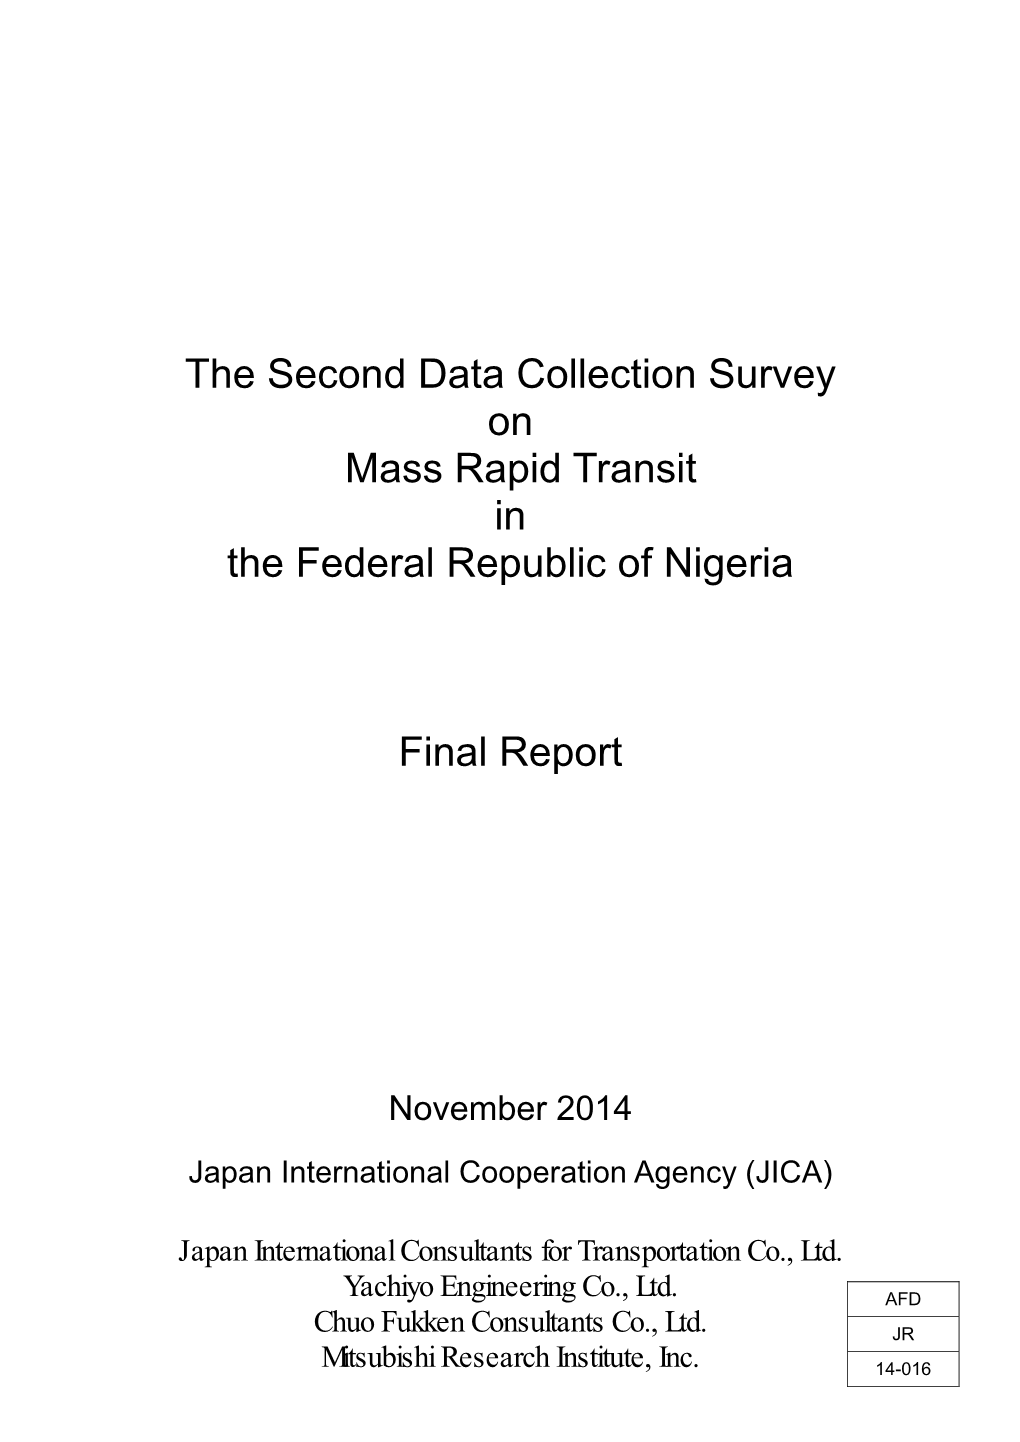 The Second Data Collection Survey on Mass Rapid Transit in the Federal Republic of Nigeria